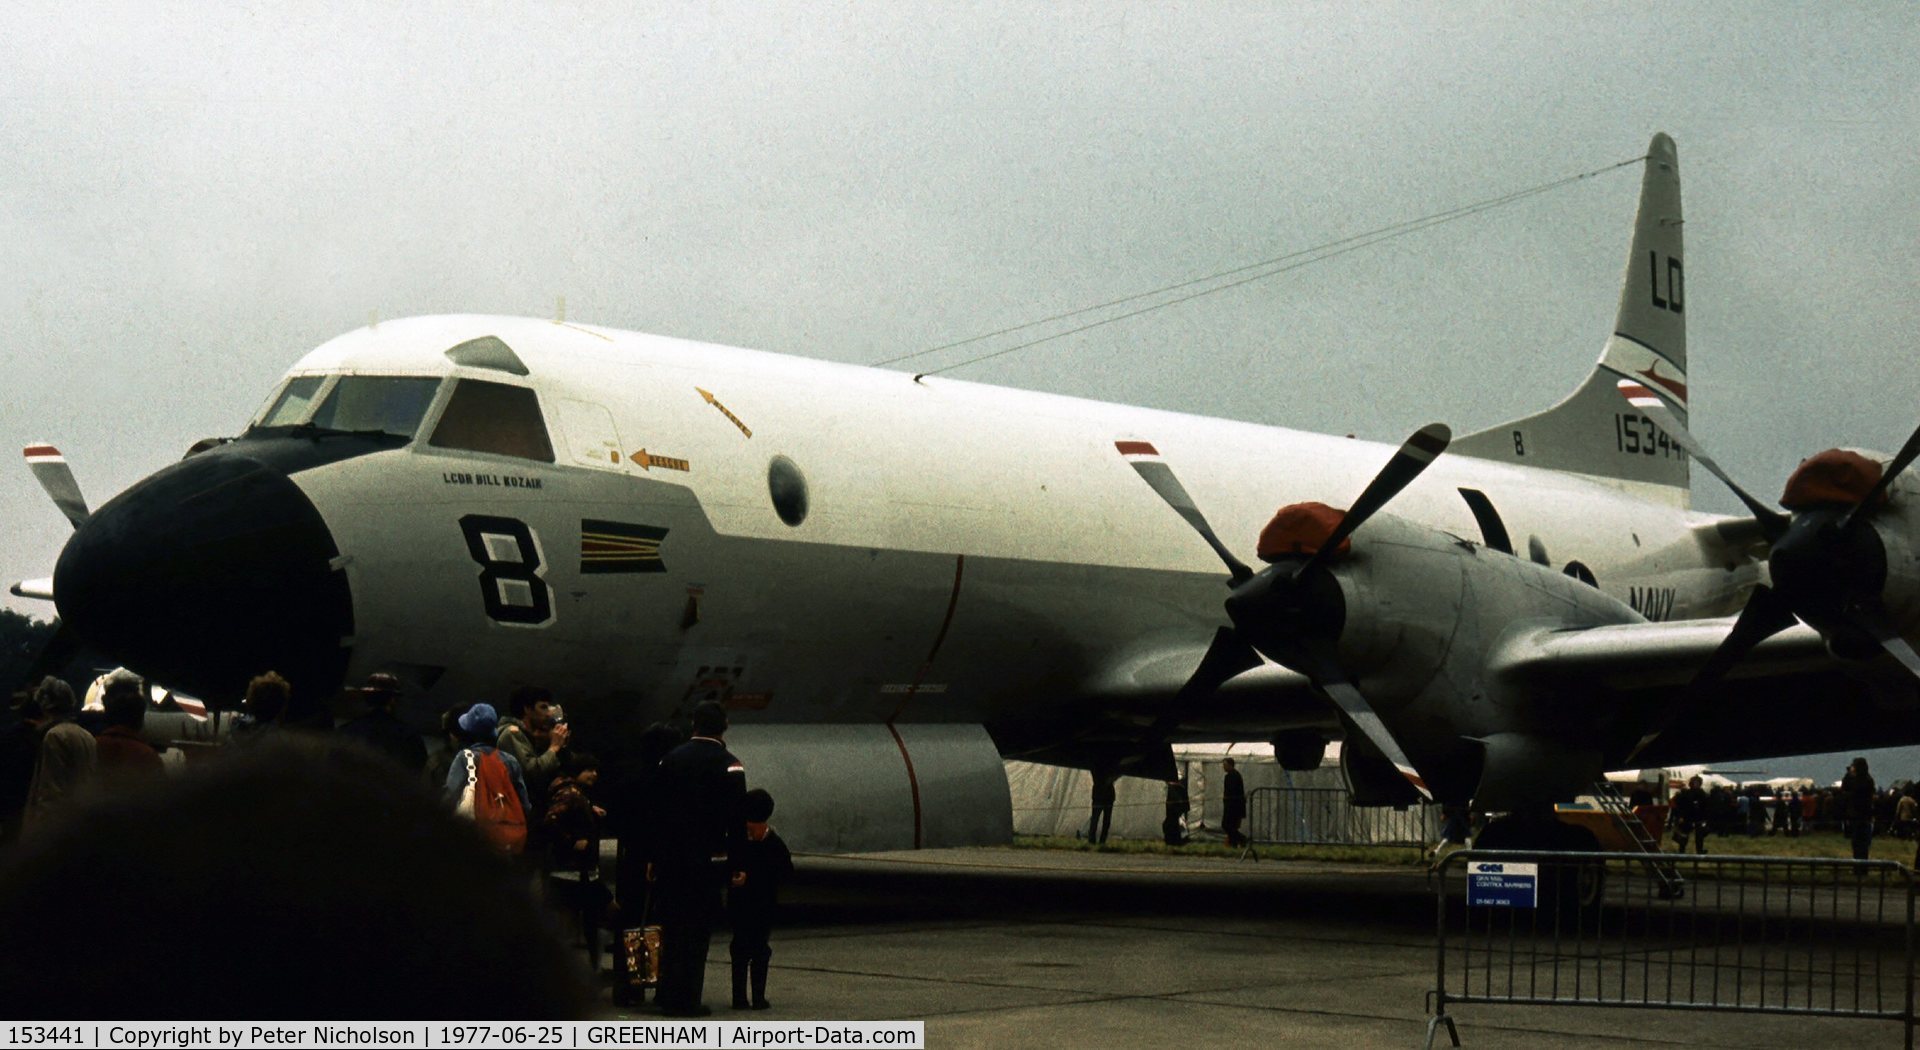 153441, 1966 Lockheed P-3B Orion C/N 185-5238, P-3B Orion of Patrol Squadron VP-10 on display at the 1977 Intnl Air Tattoo at RAF Greenham Common.